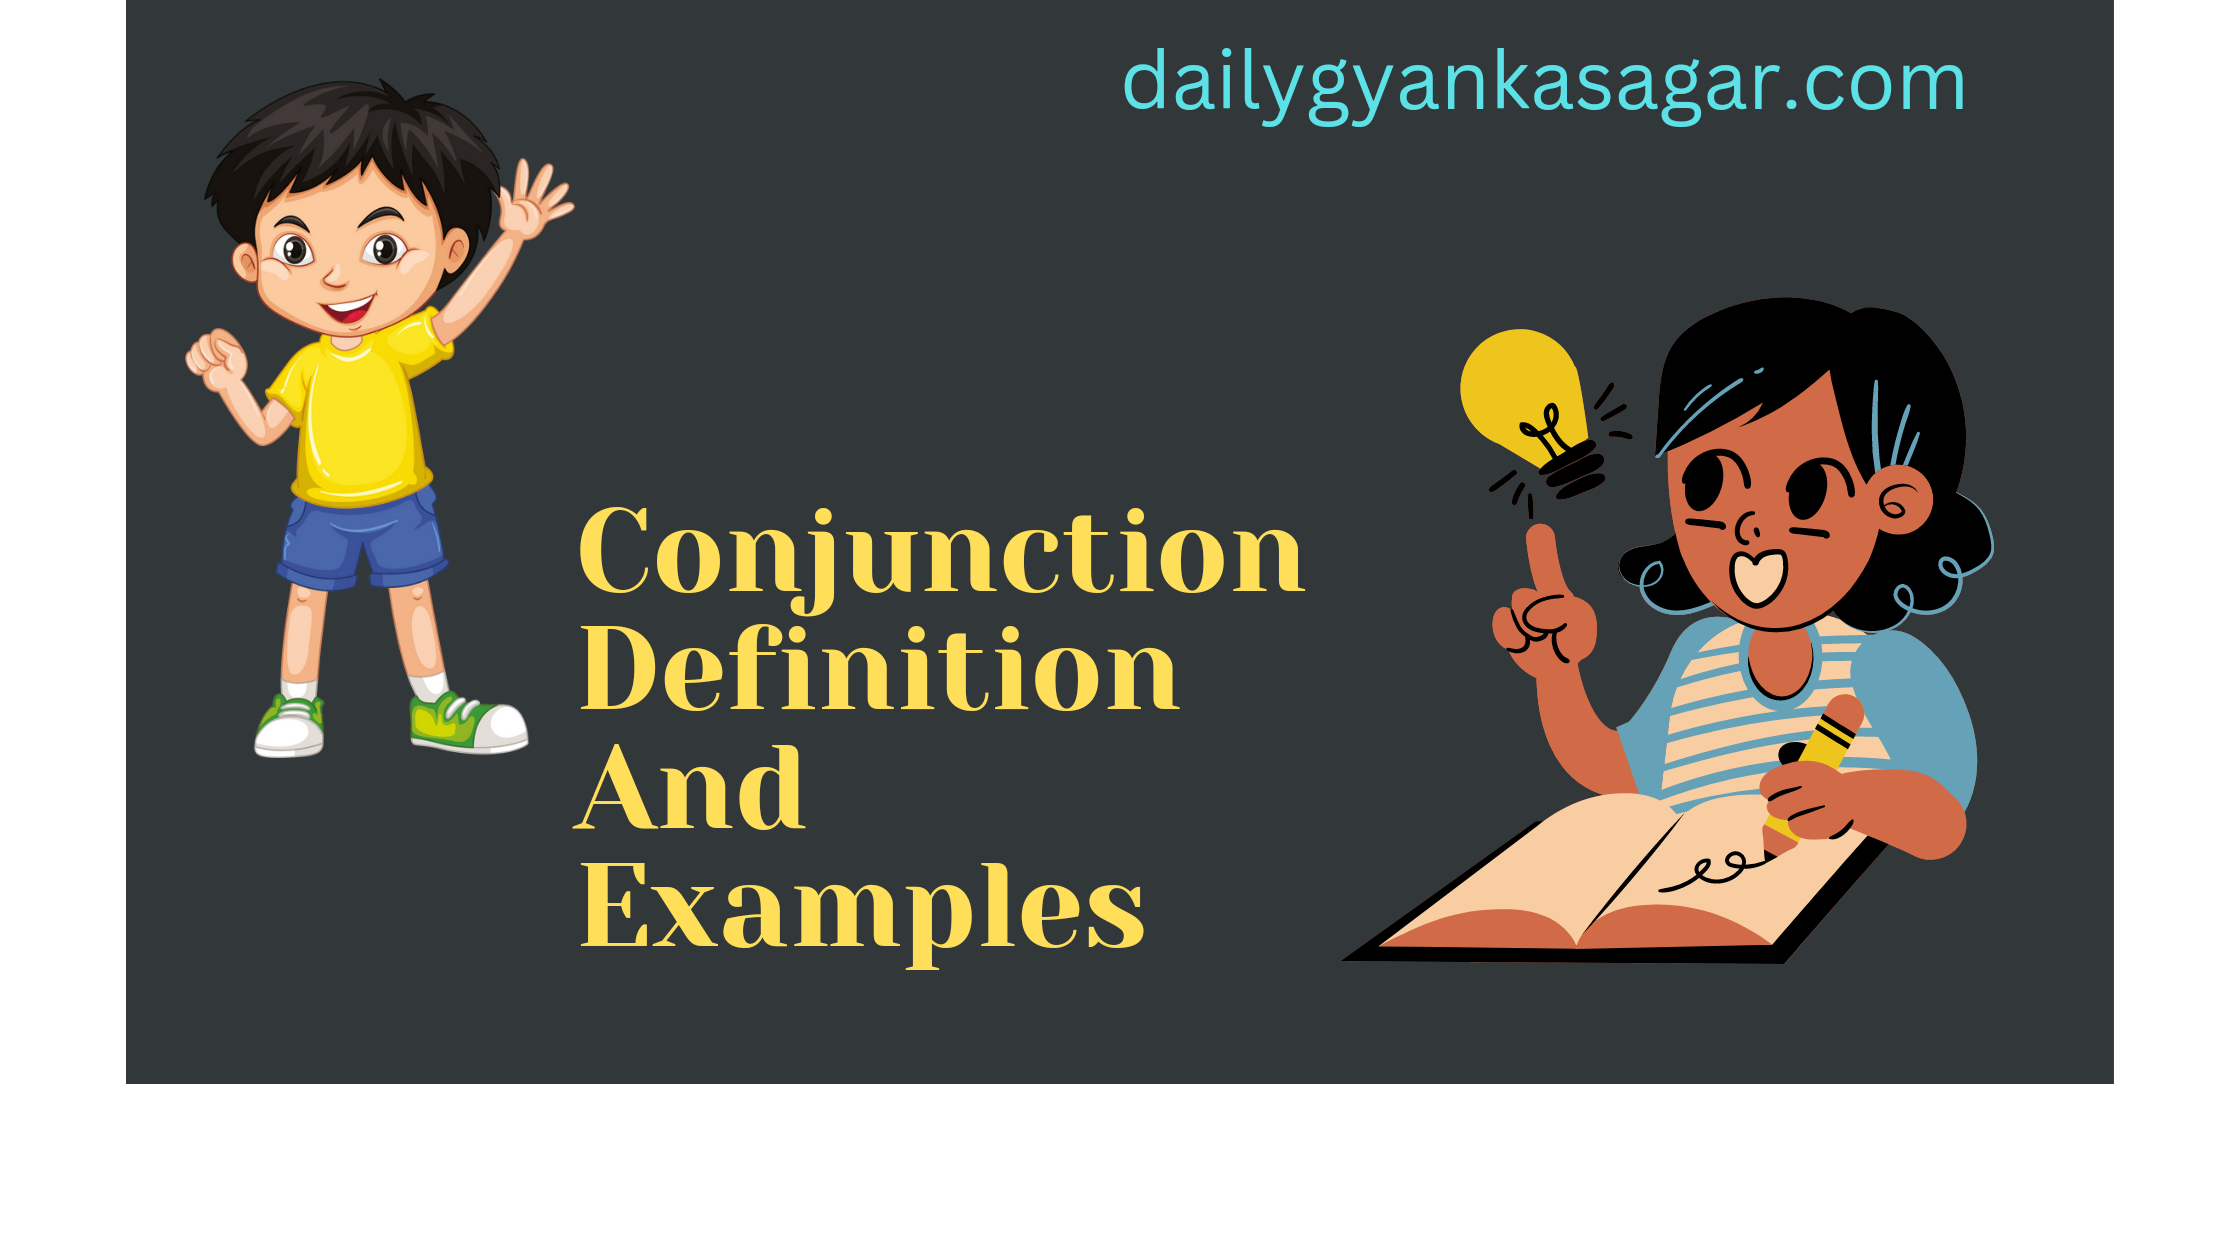 Conjunction Definition And Examples